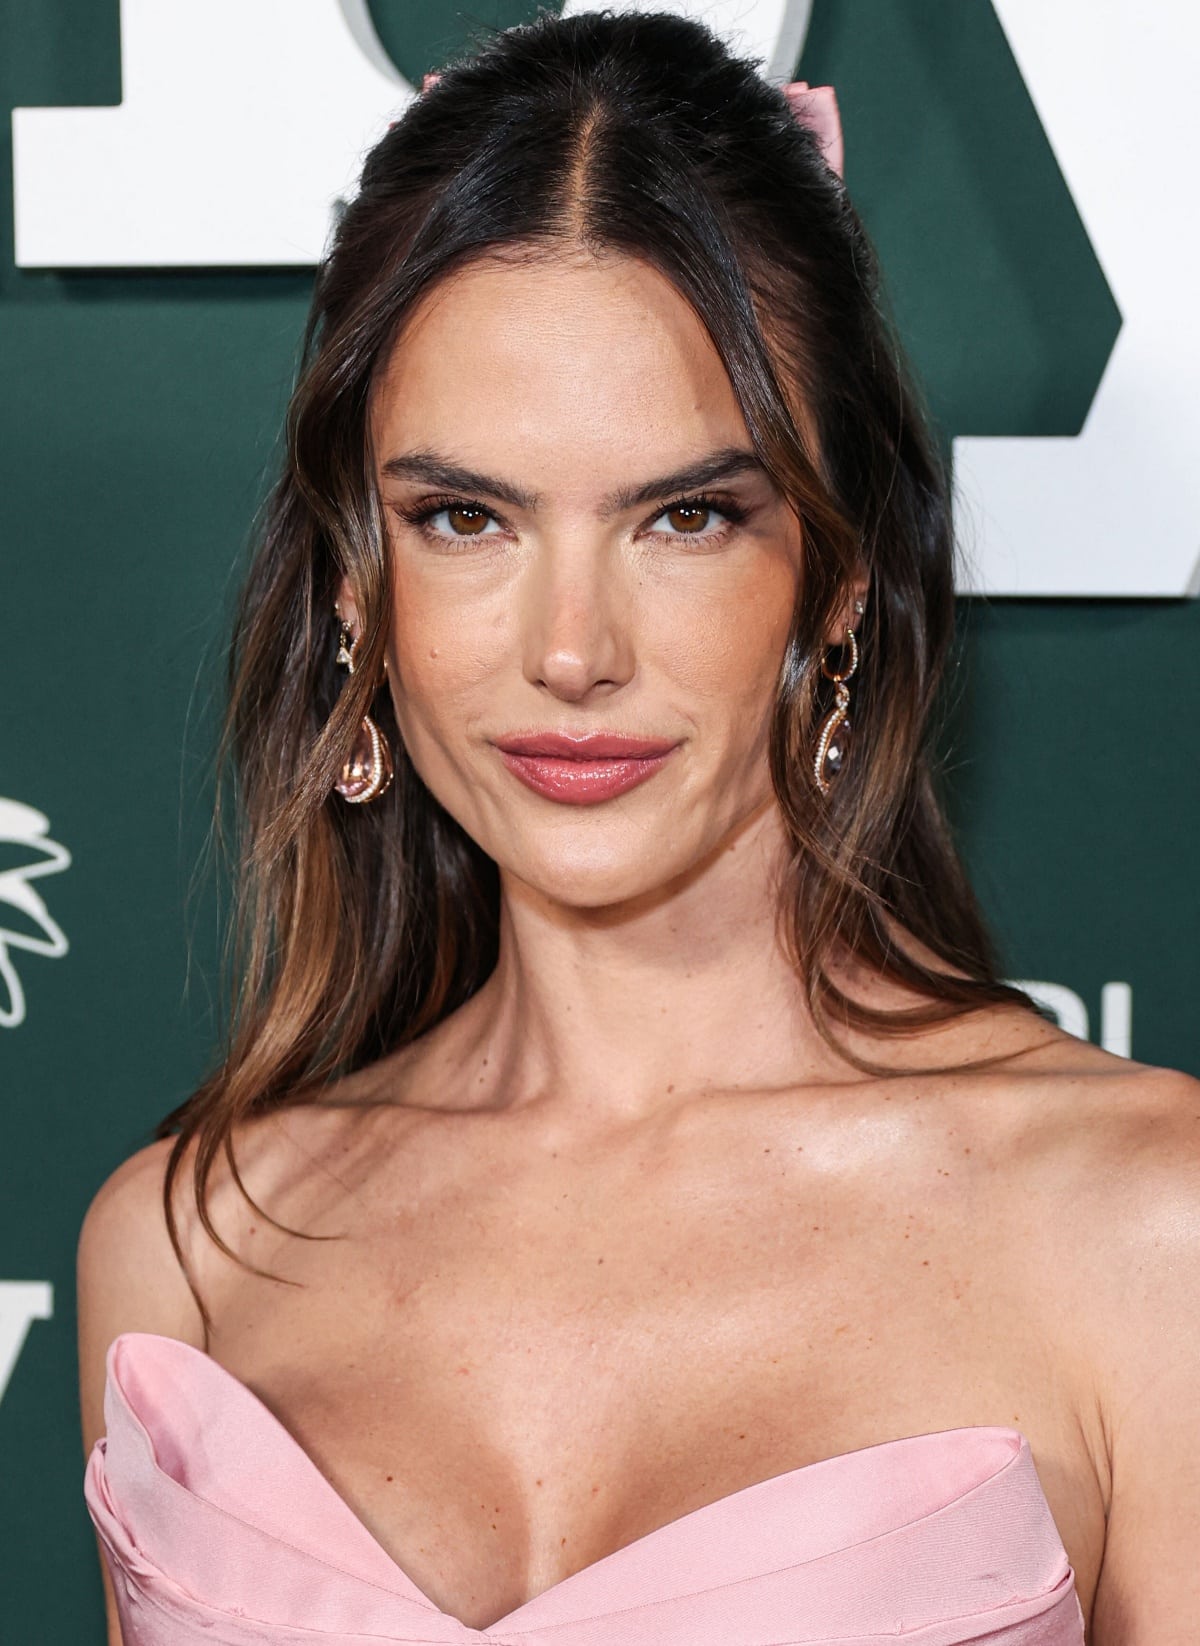 Alessandra Ambrosio’s beauty look consisted of thick eyebrows, soft pink lips, wavy hair accented with a pink bow, and Le Vian jewels